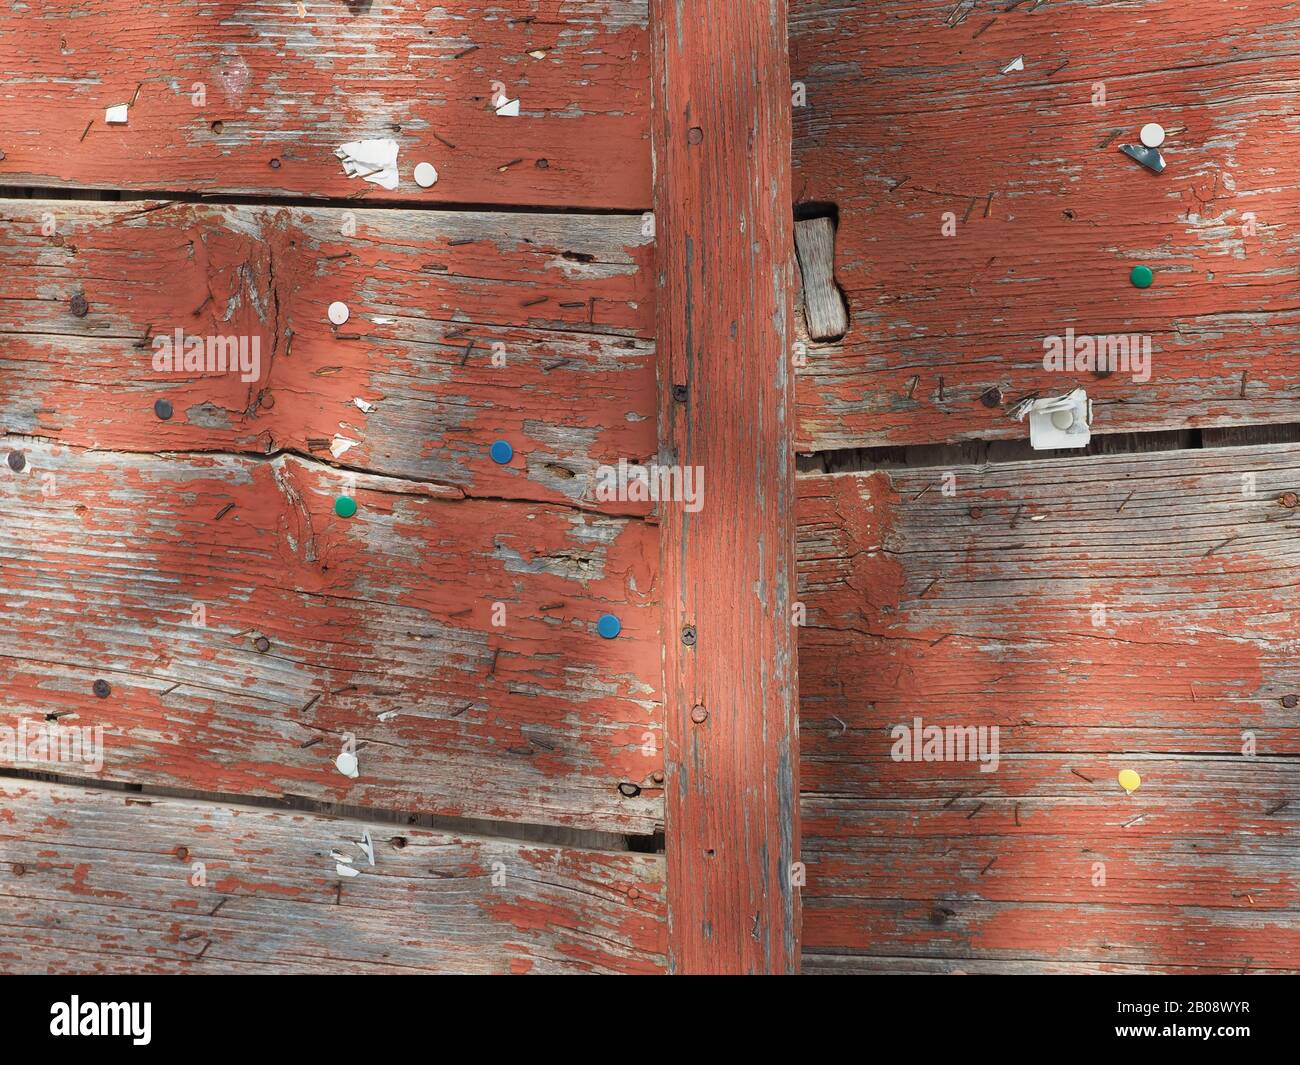 Worn, old wooden door studded with multi-coloured drawing pins in Kythira, Greece Stock Photo